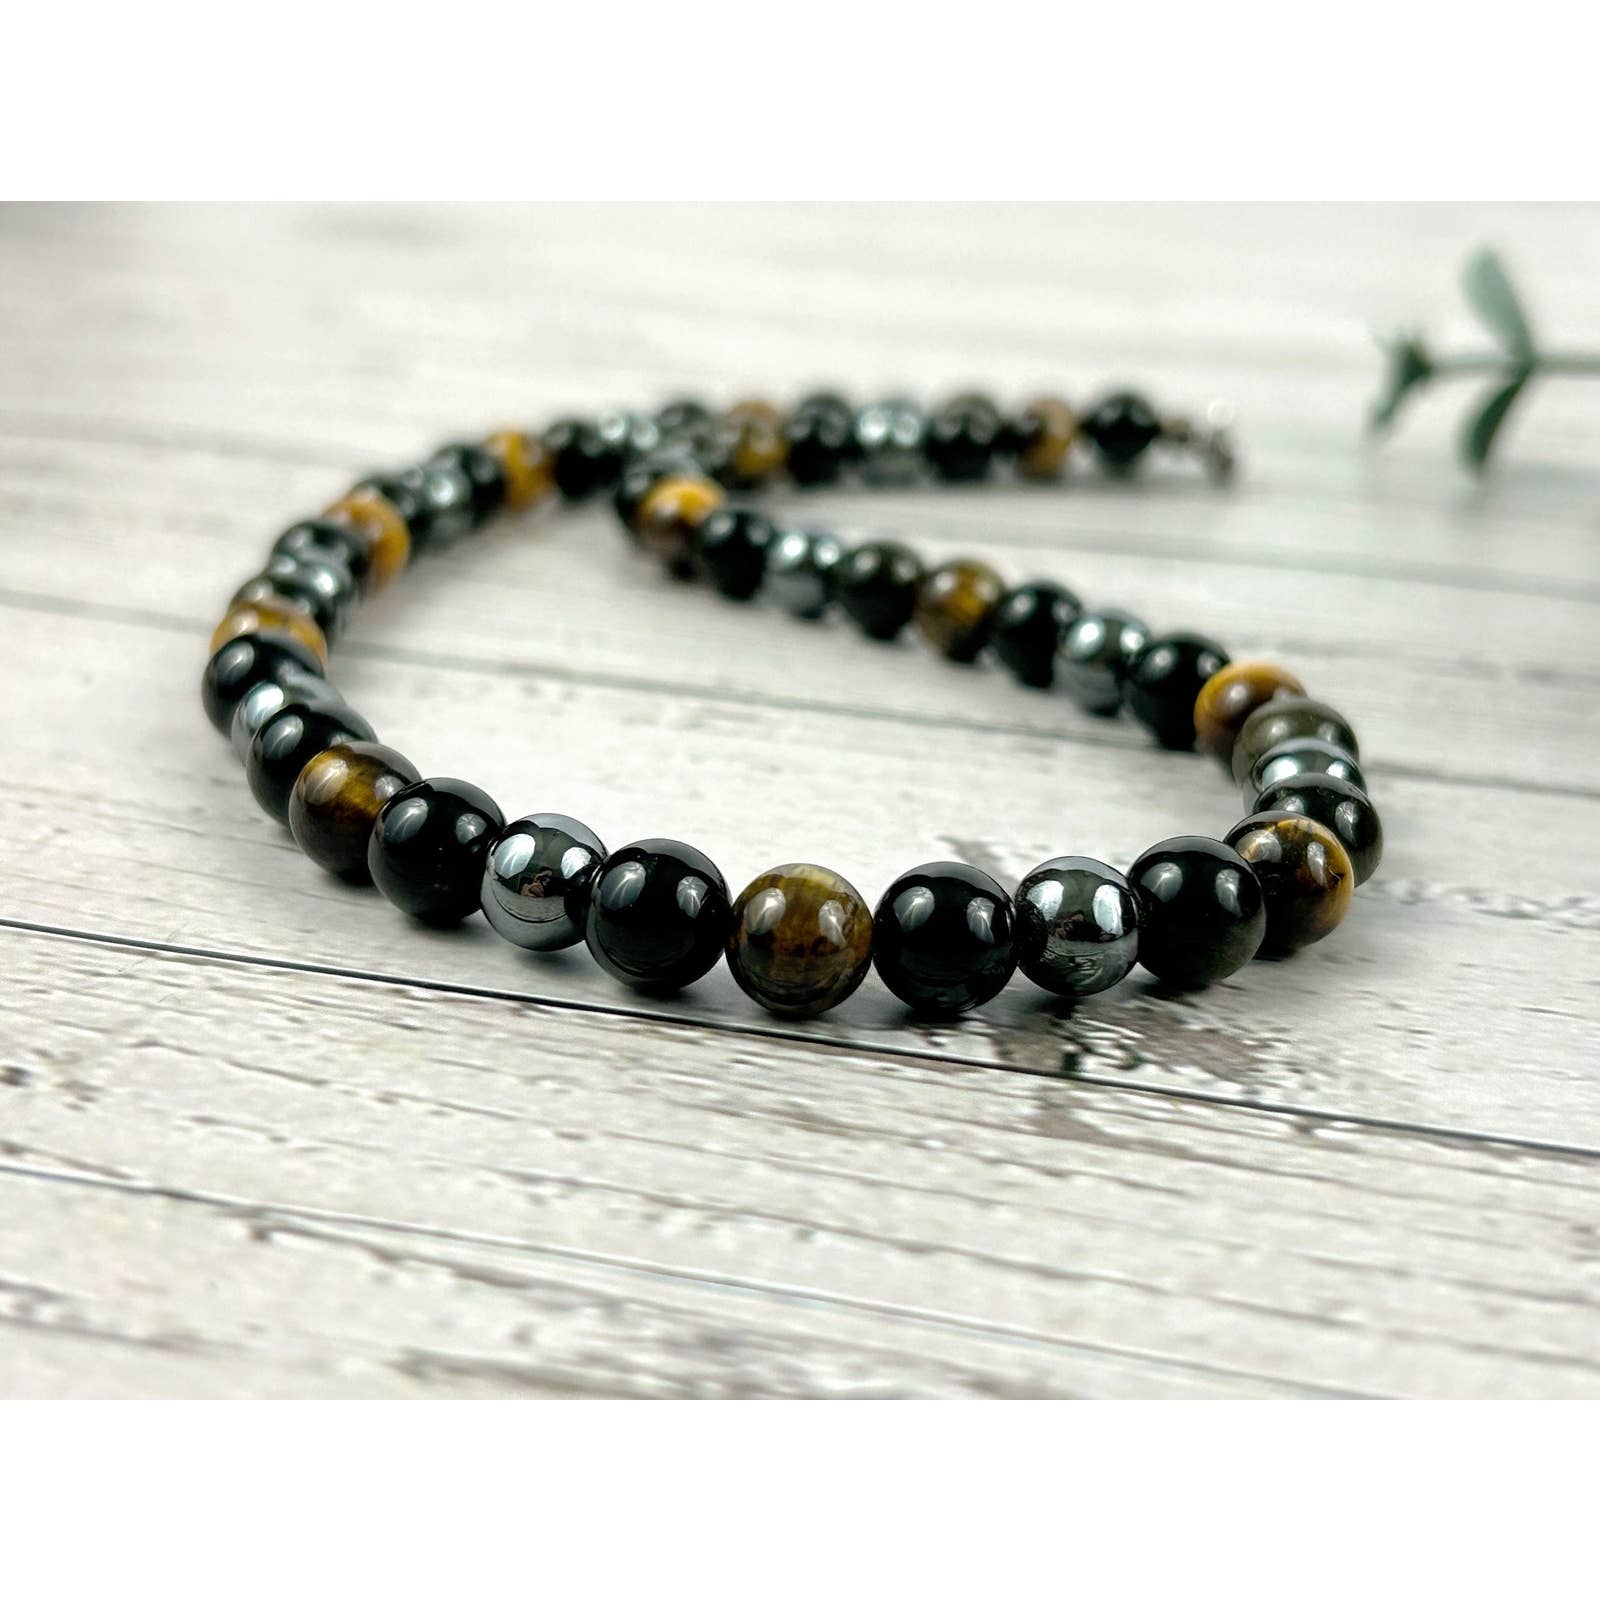 Triple Protection Necklace - Tiger Eye - Obsidian - Hematite